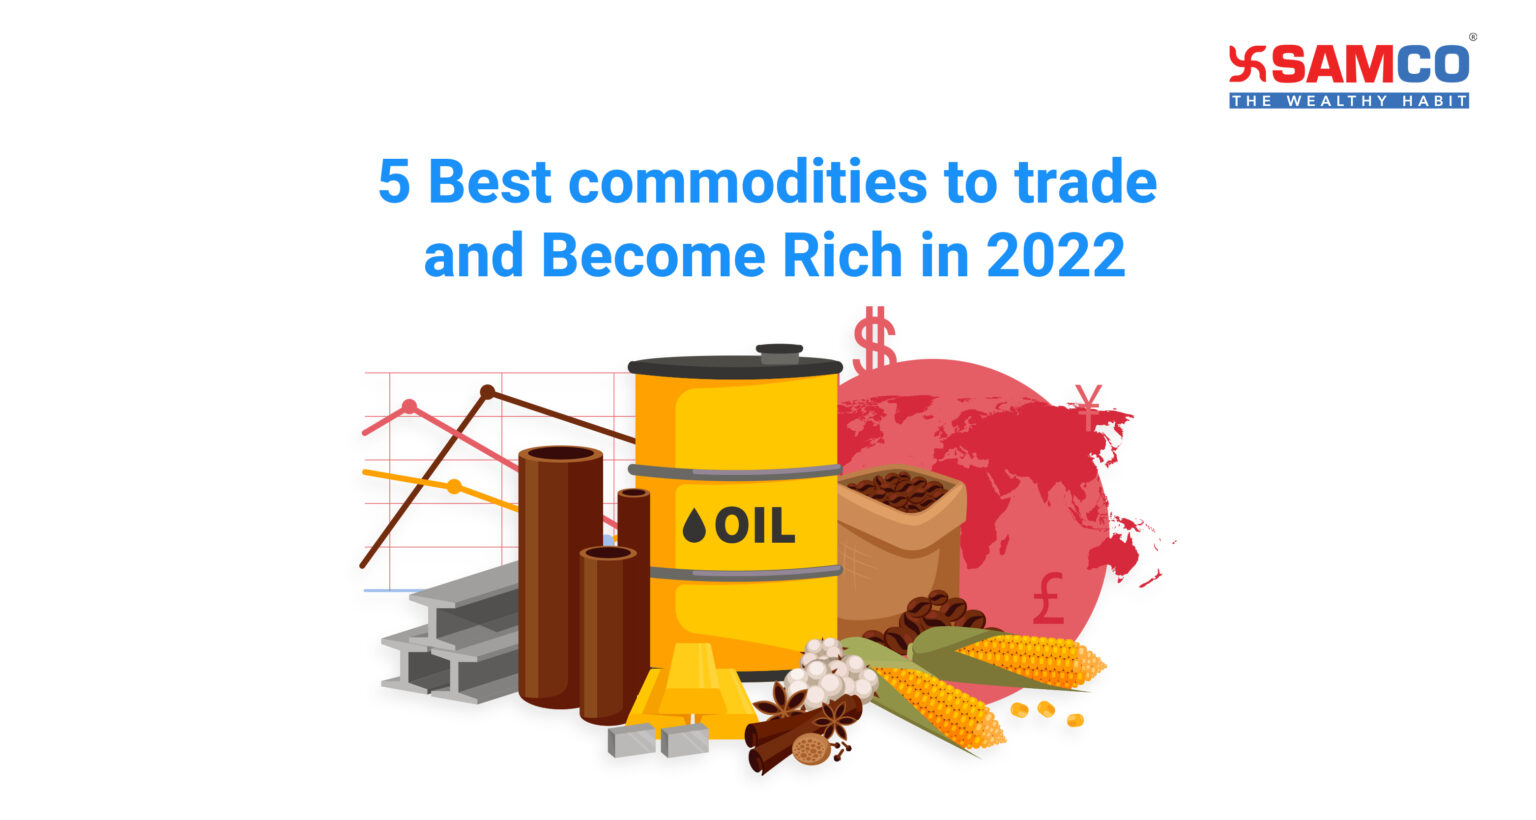 21 Best Commodities to Trade and Become Rich in 21